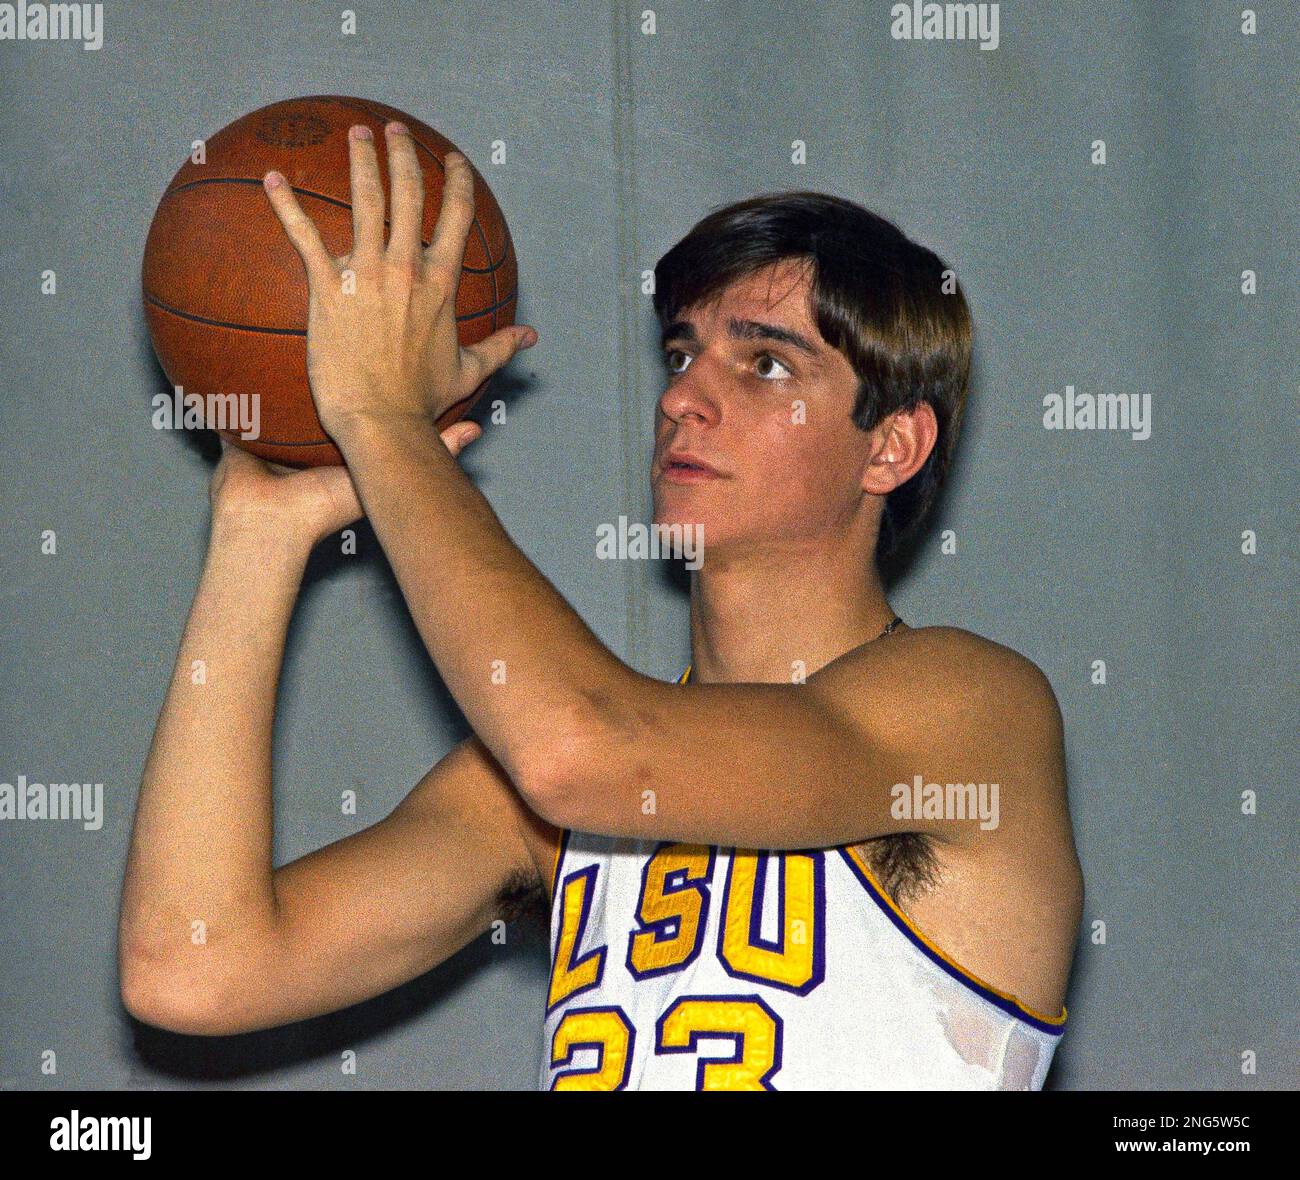 Pistol' Pete, Pete Maravich, basketball player for LSU, in posed